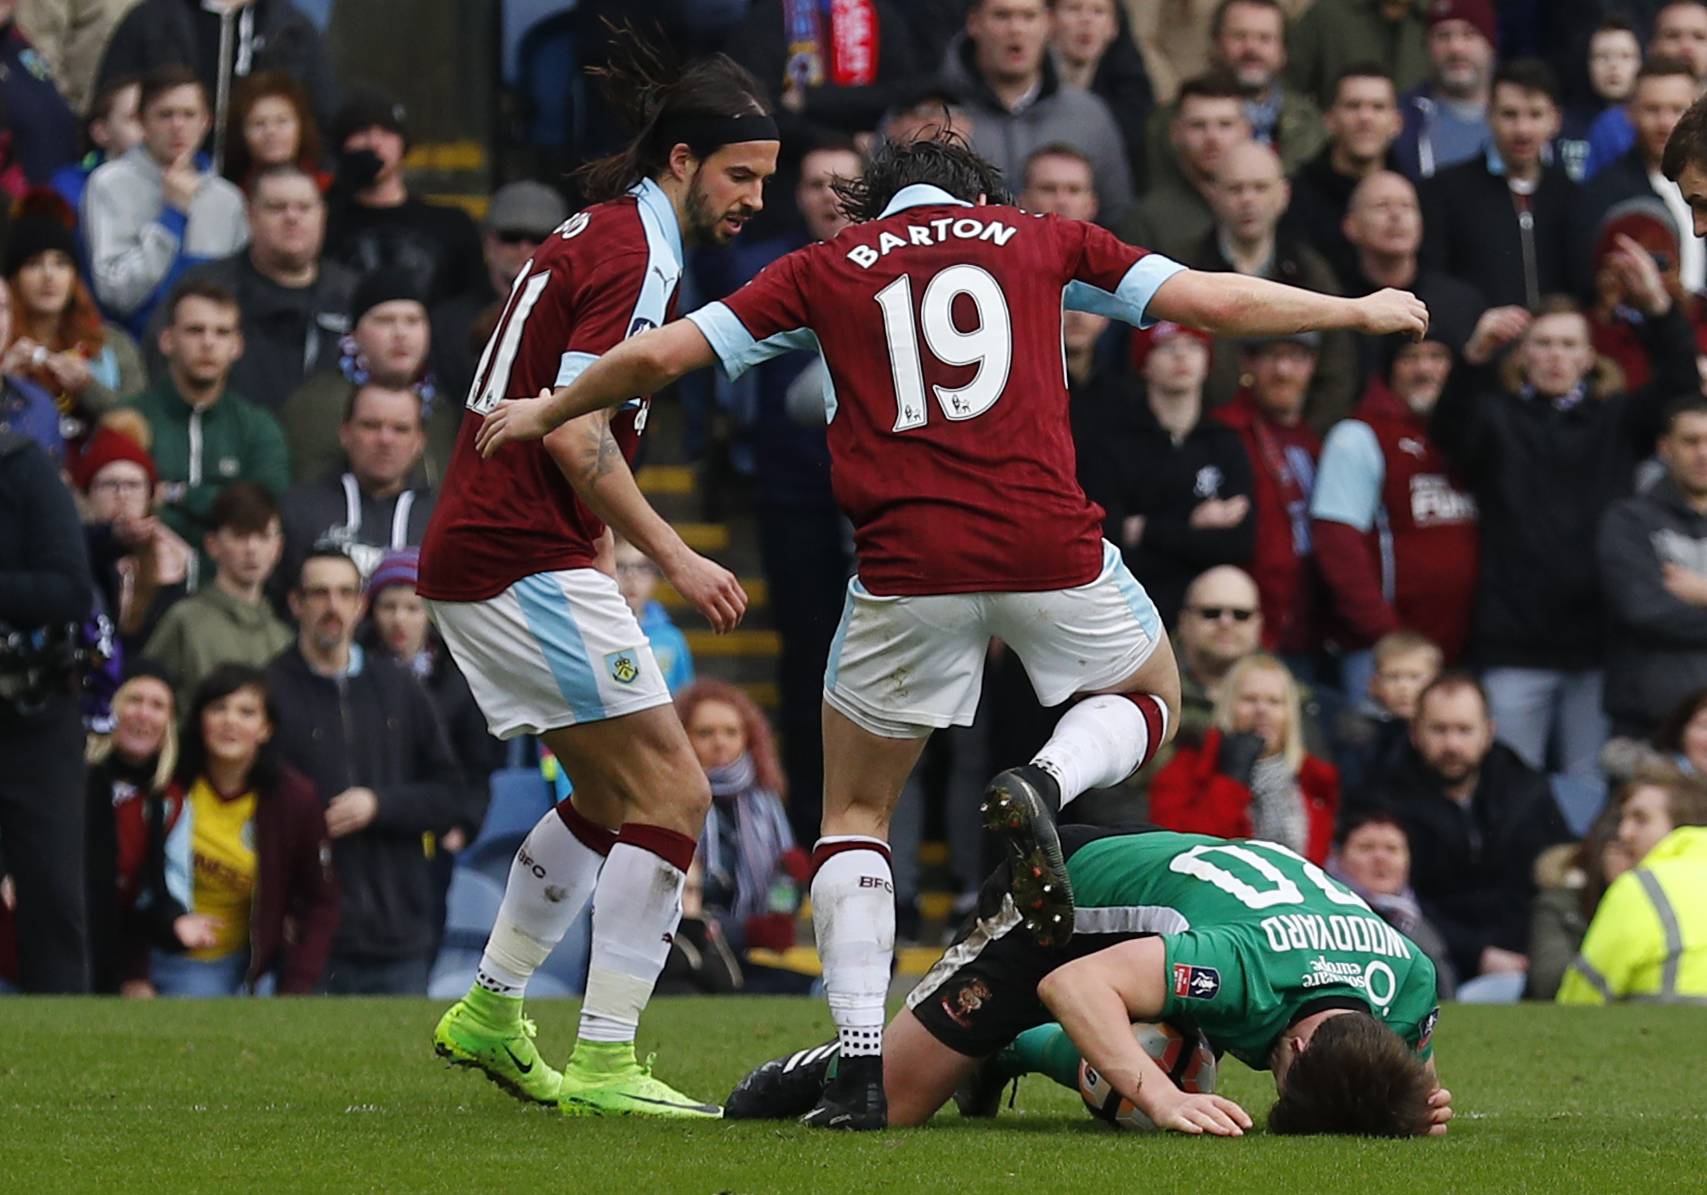 Burnley's Joey Barton clashes with Lincoln's Alex Woodyard as George Boyd looks on